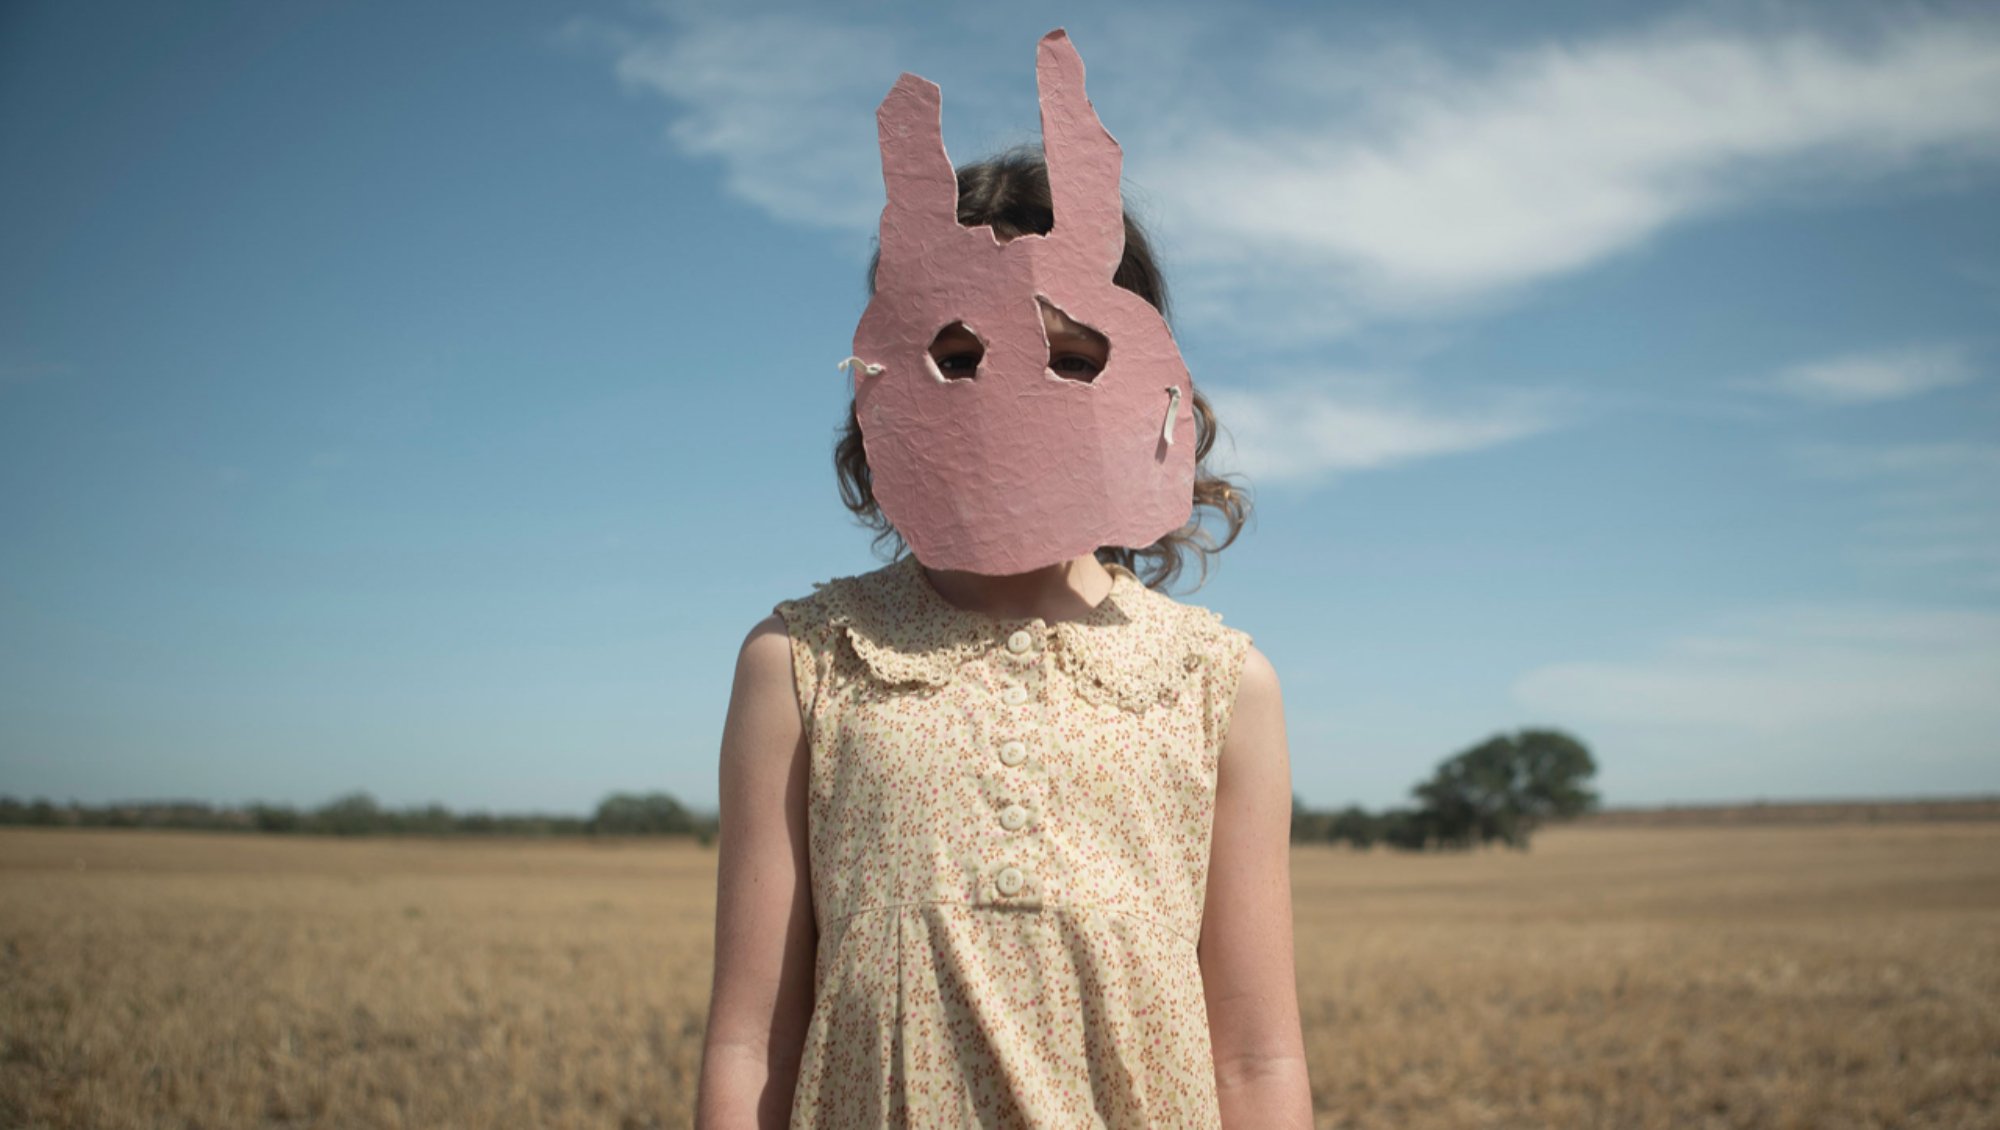 'Run Rabbit Run' Lily LaTorre as Mia wearing a bunny mask, standing in front of plains